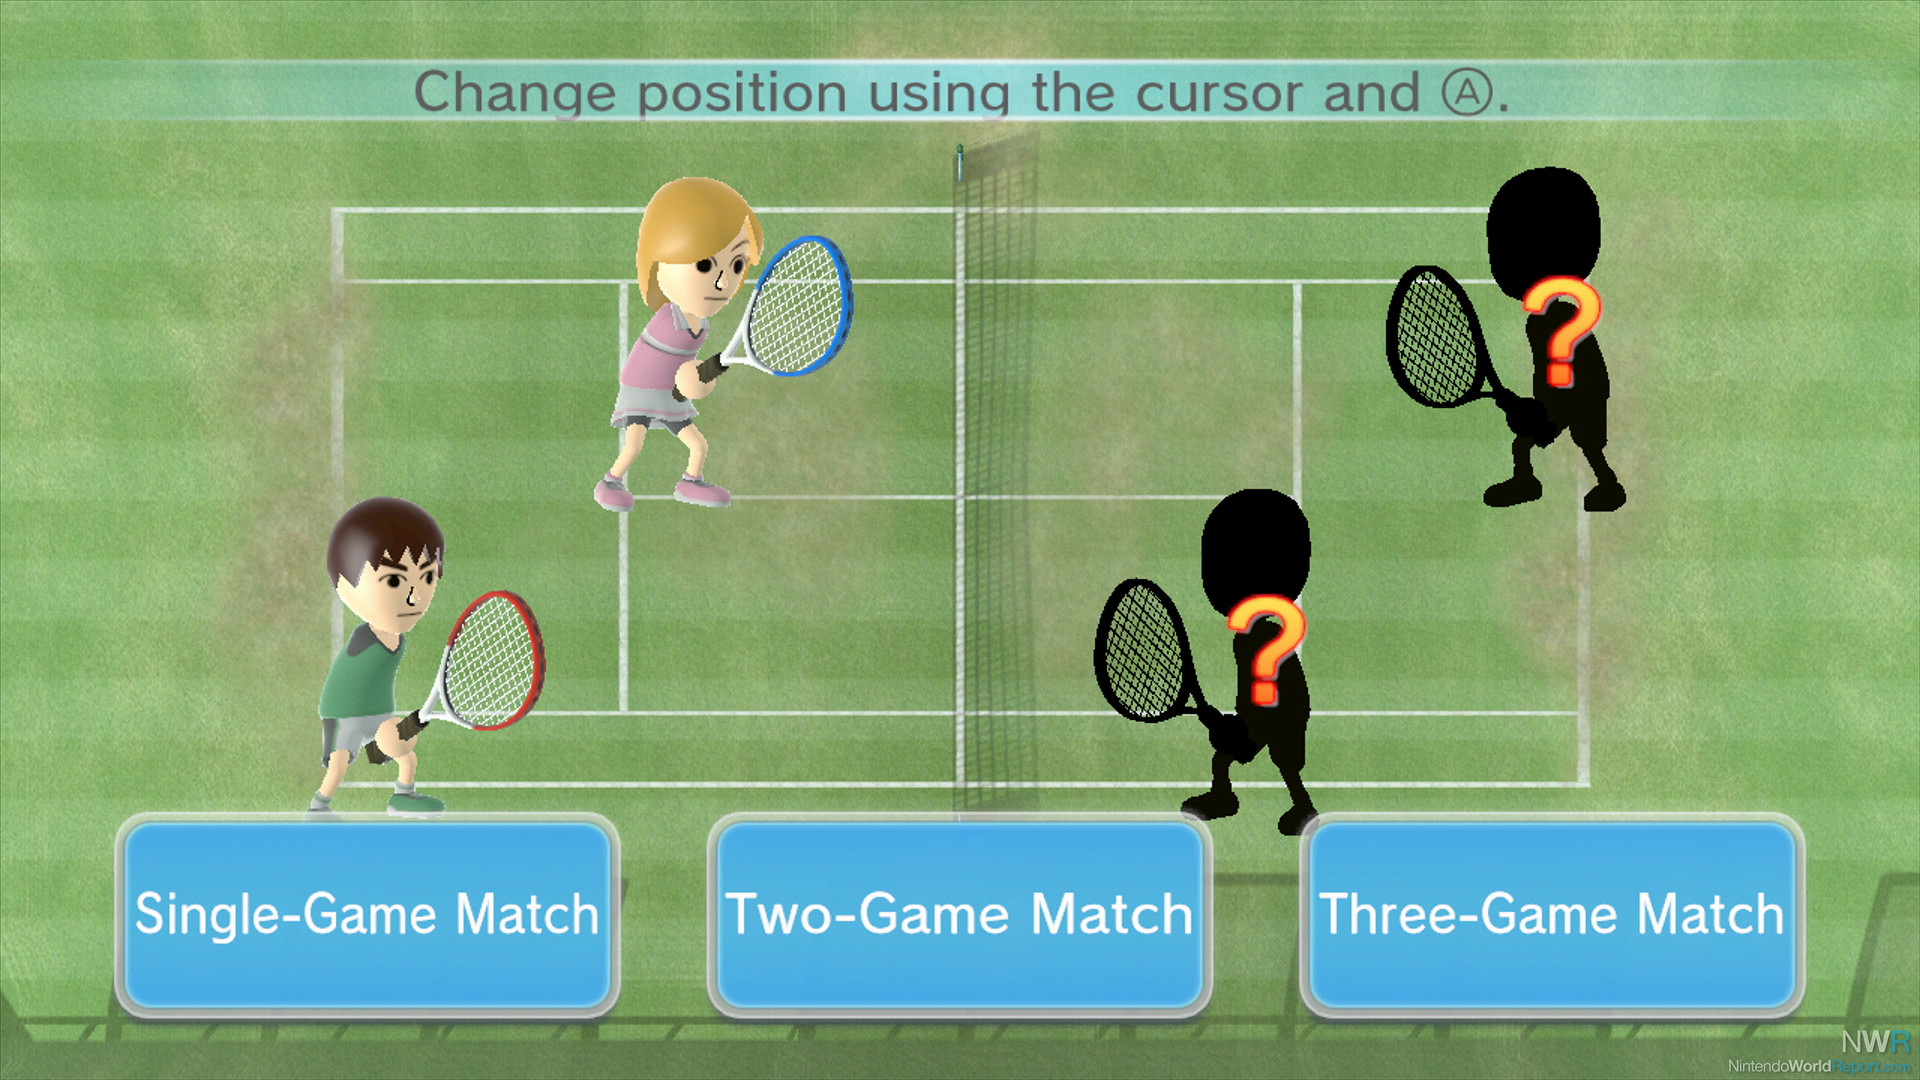 Wii Sports Club: Tennis Review - Review - Nintendo World Report